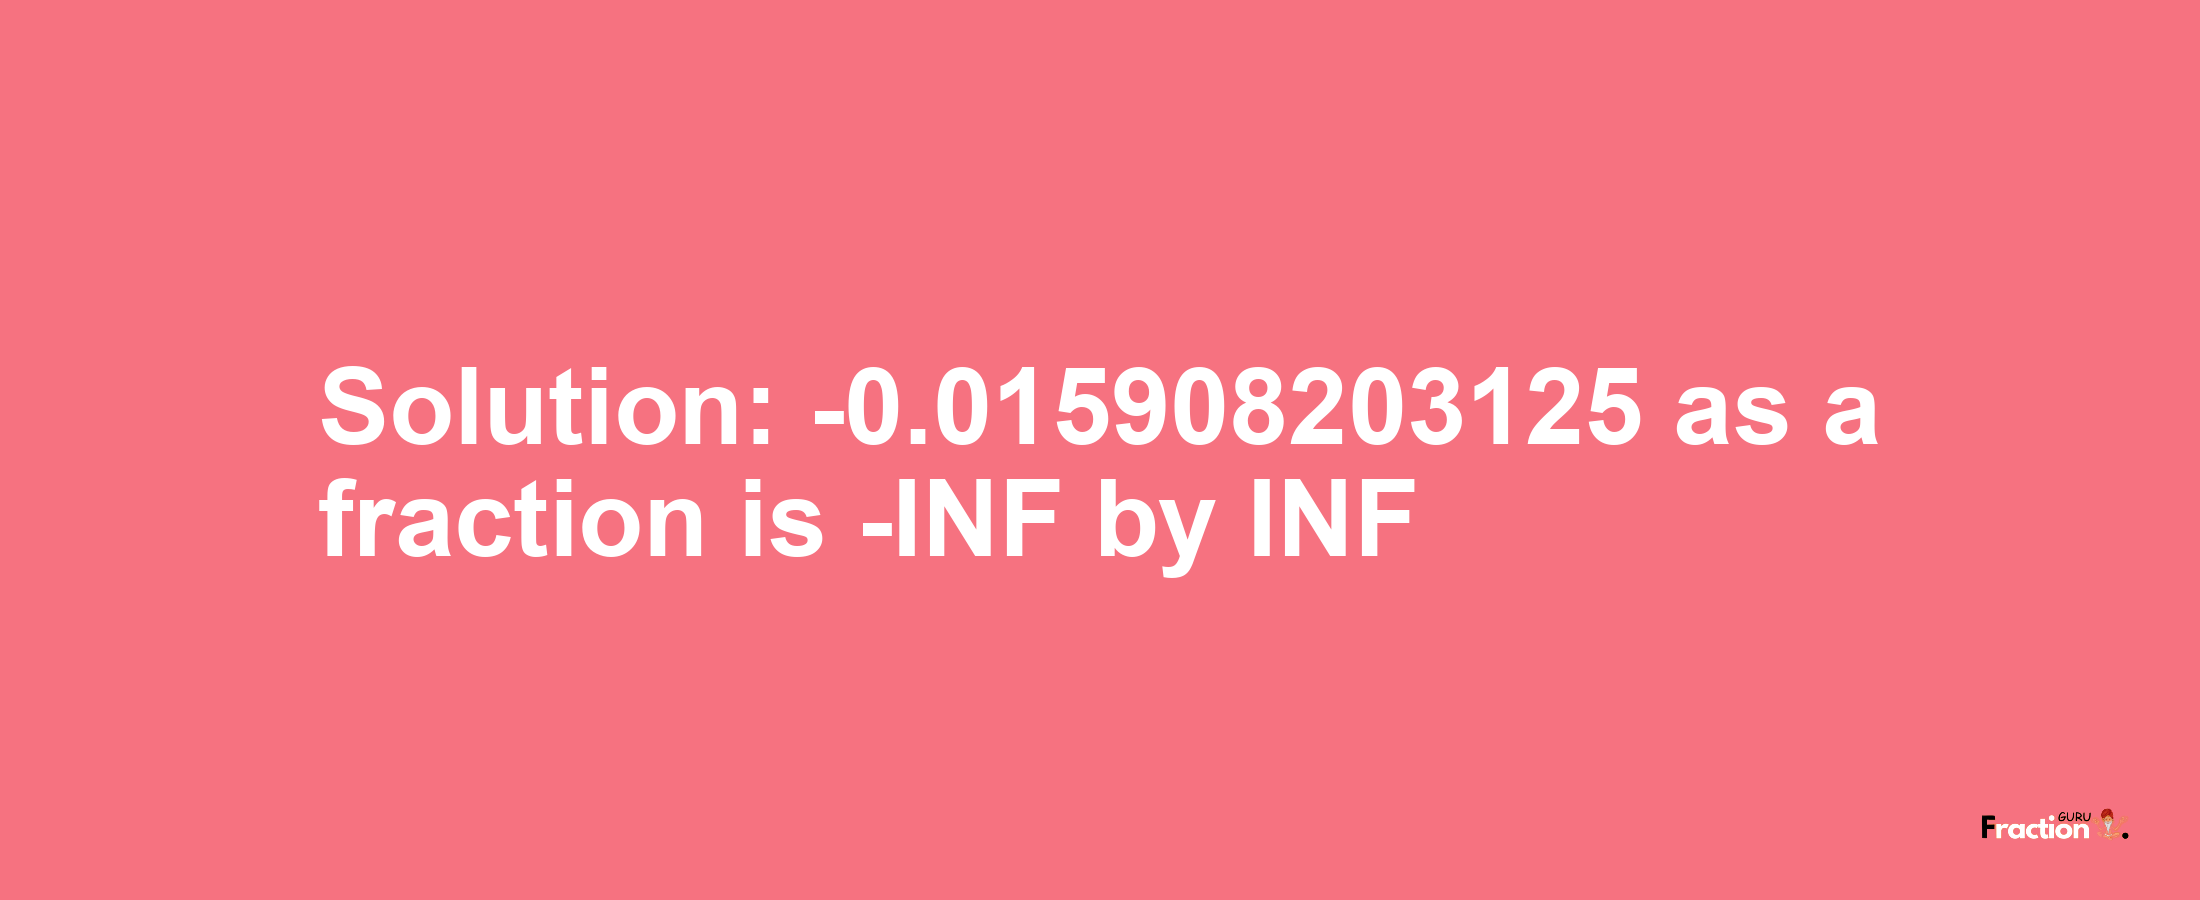 Solution:-0.015908203125 as a fraction is -INF/INF